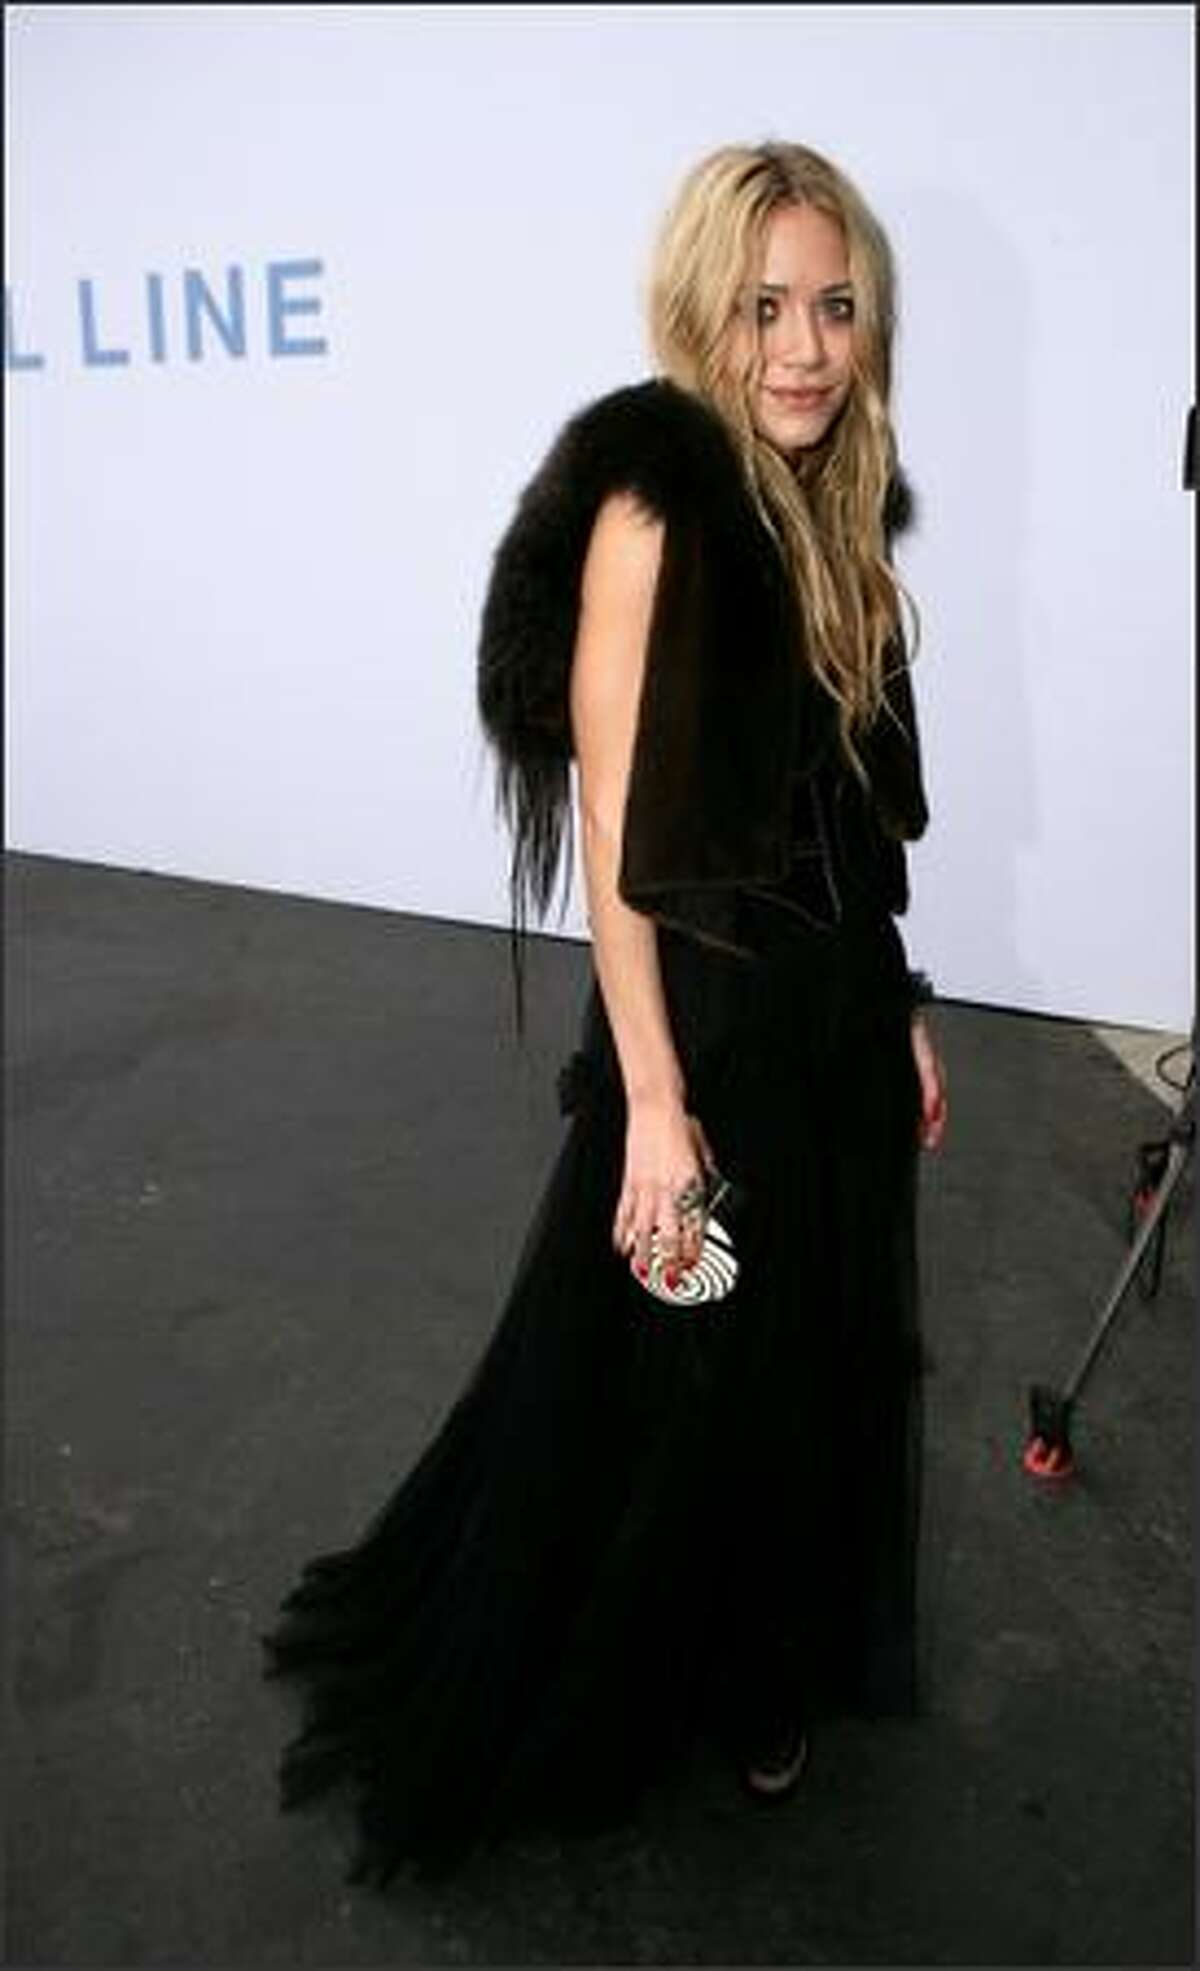 Actress Mary-Kate Olsen arrives at the 2007/8 Chanel Cruise Show Presented By Karl Lagerfeld held at Hangar 8 on May 18, 2007 in Santa Monica, California. She is on Mr. Blackwell's 48th annual worst-dressed list.